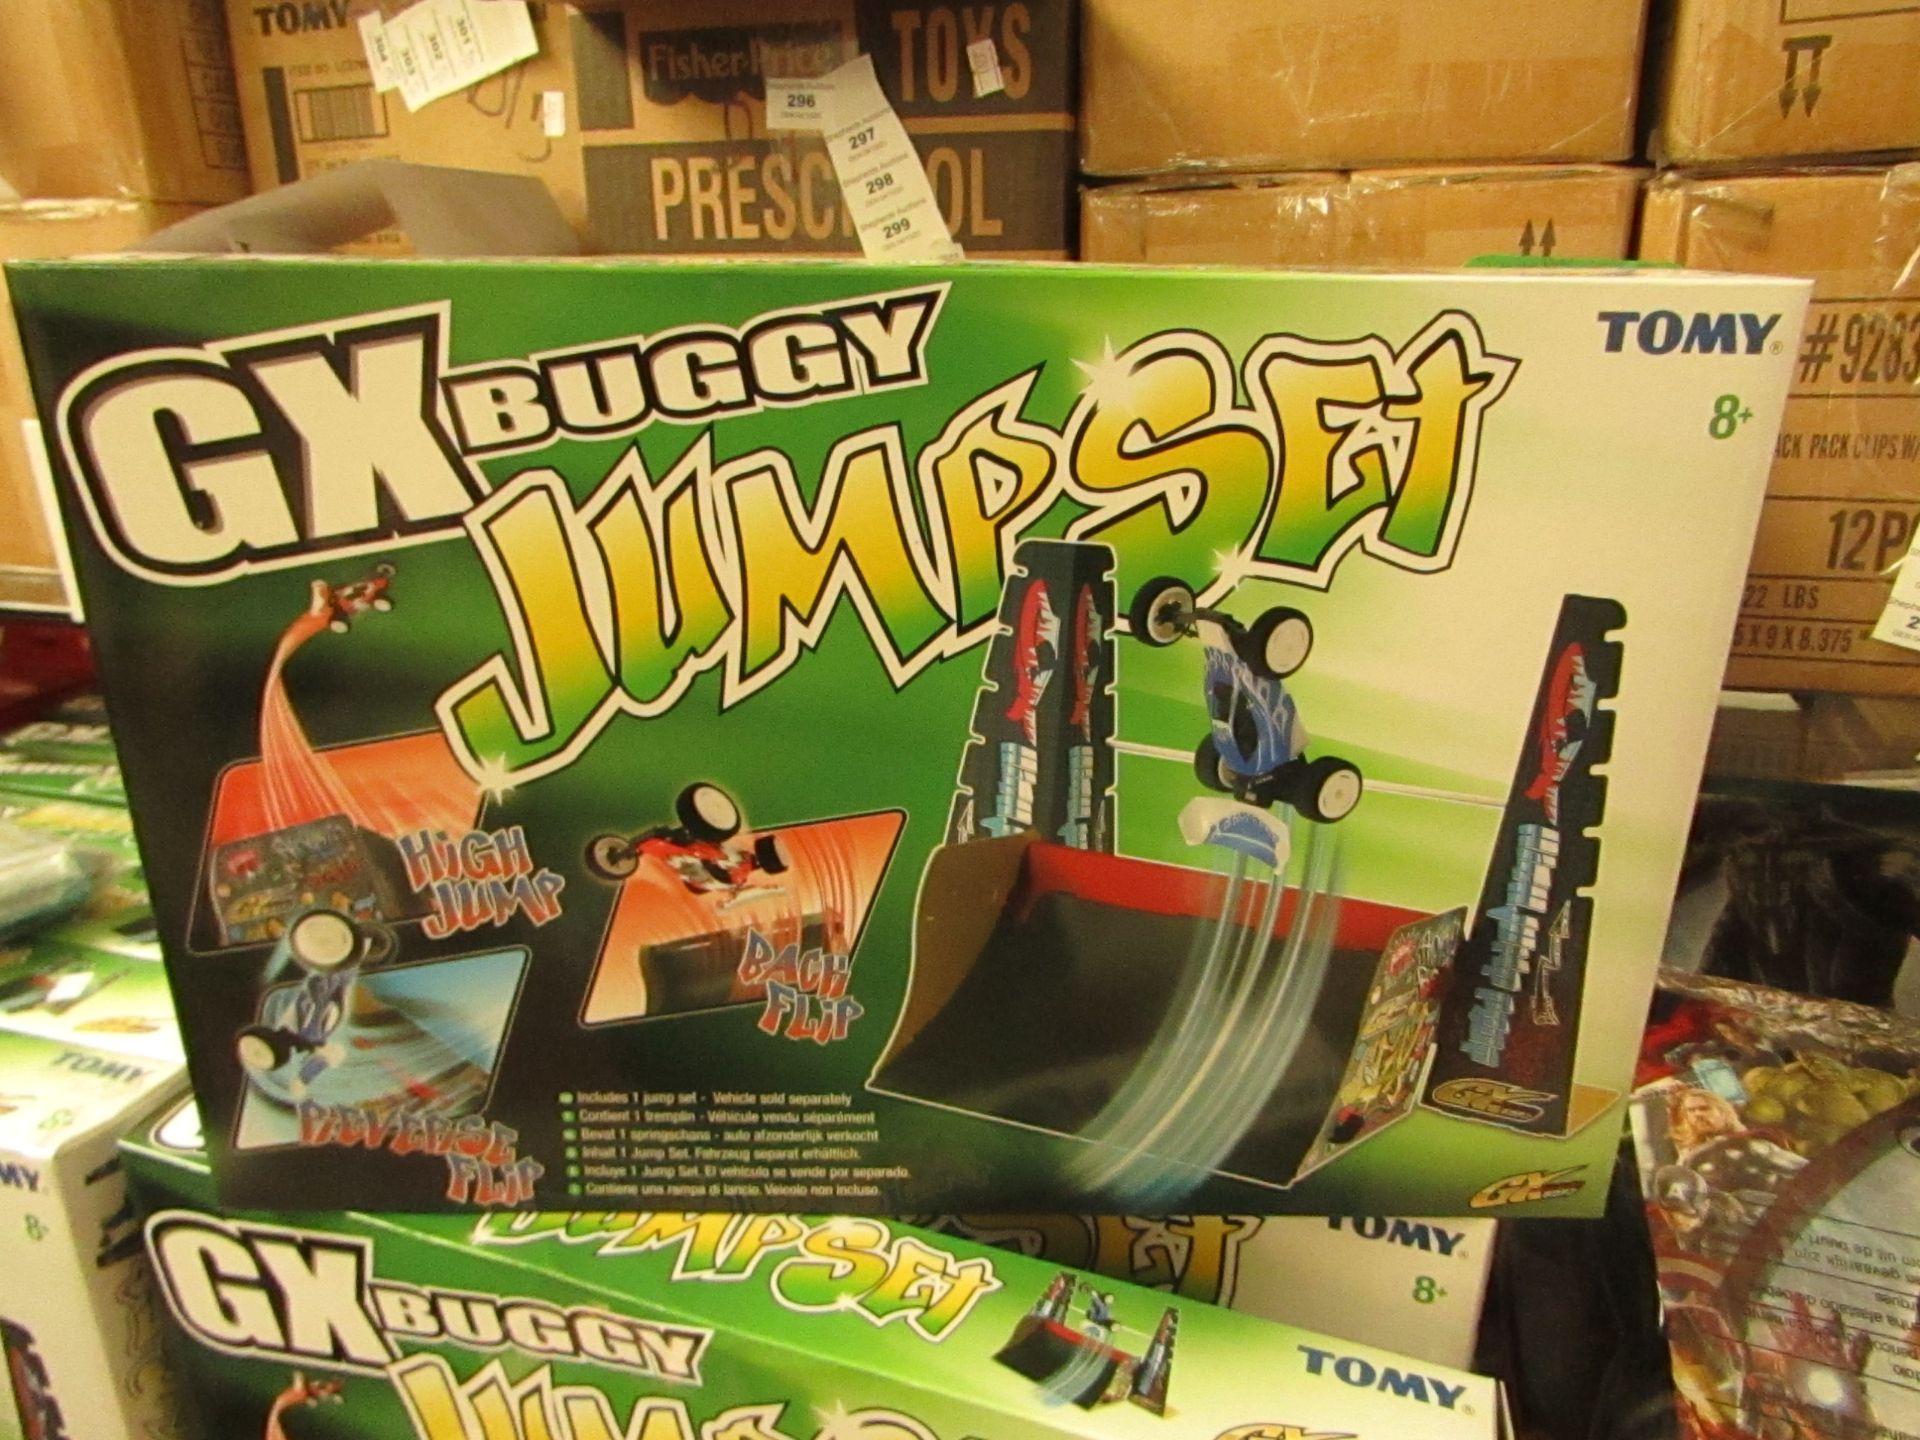 1 x Tomy GX Buggy Jumpset (vehicle not included) new & packaged